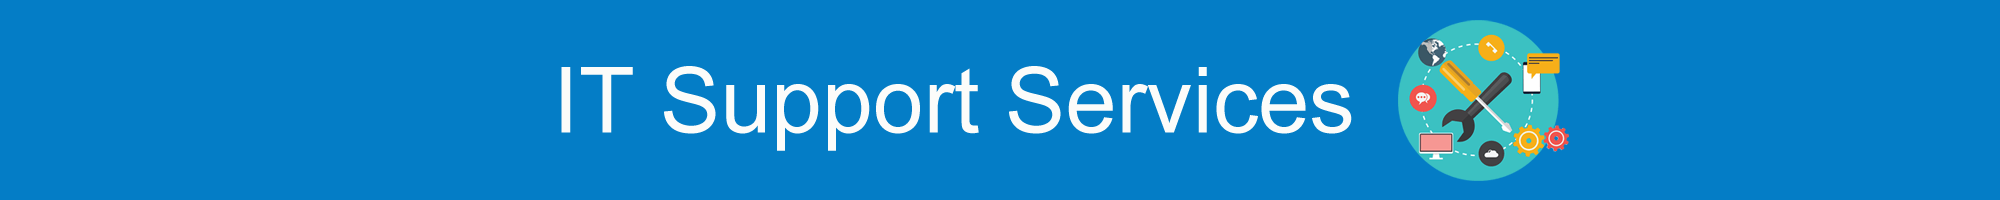 IT Support Services RI